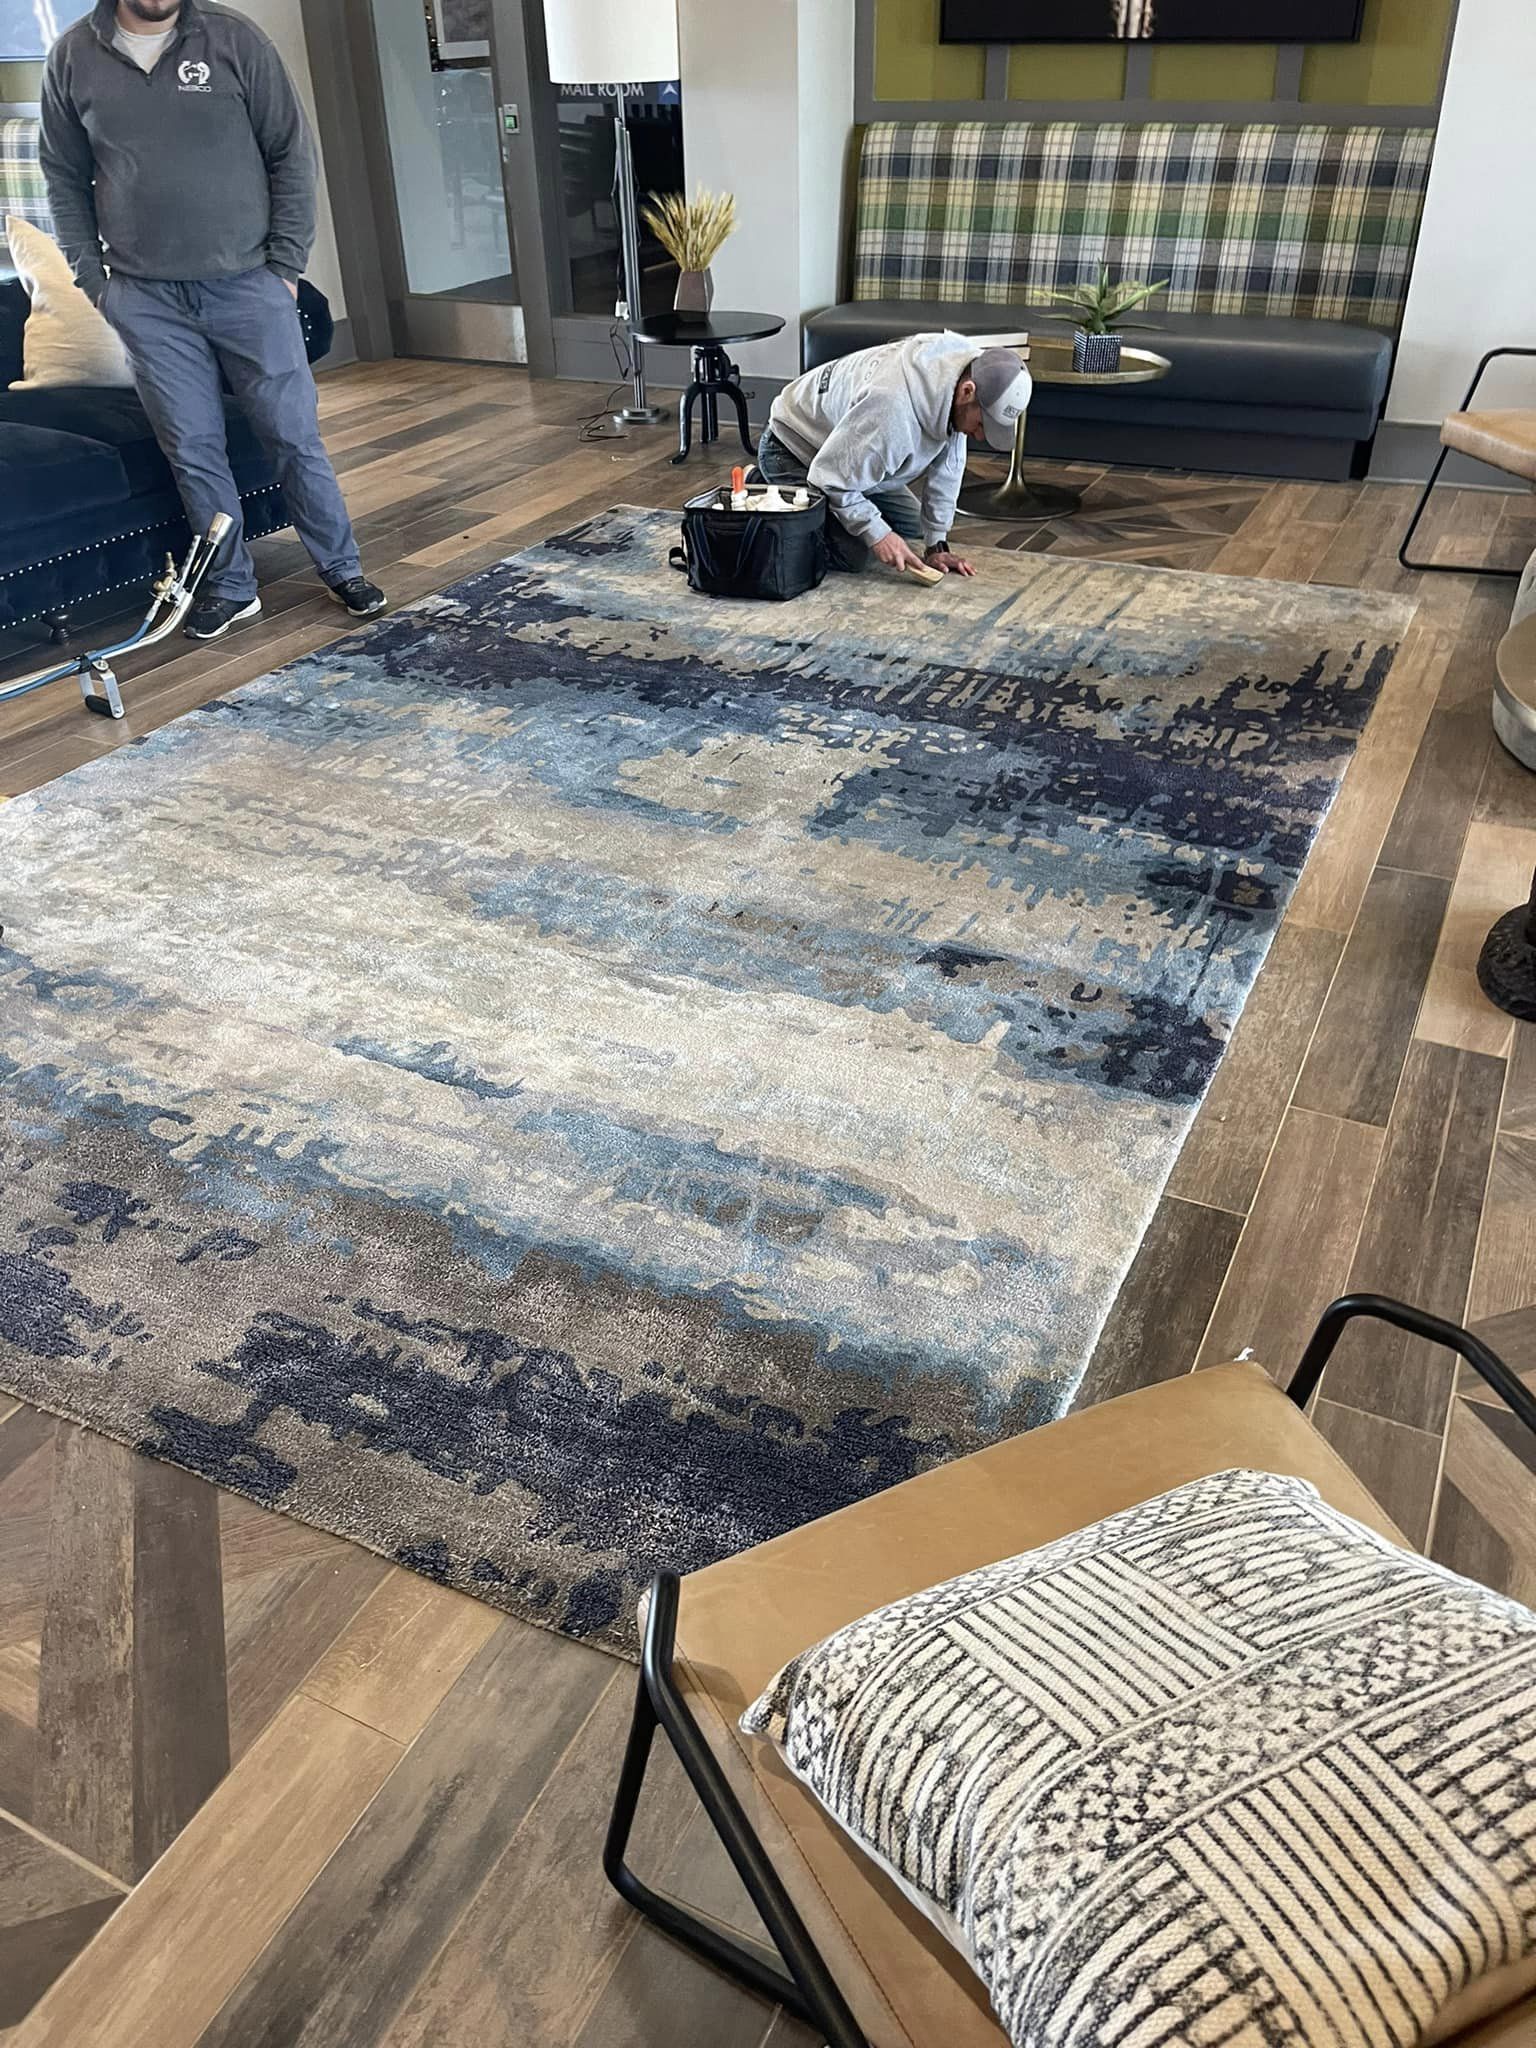 A person cleaning a rug